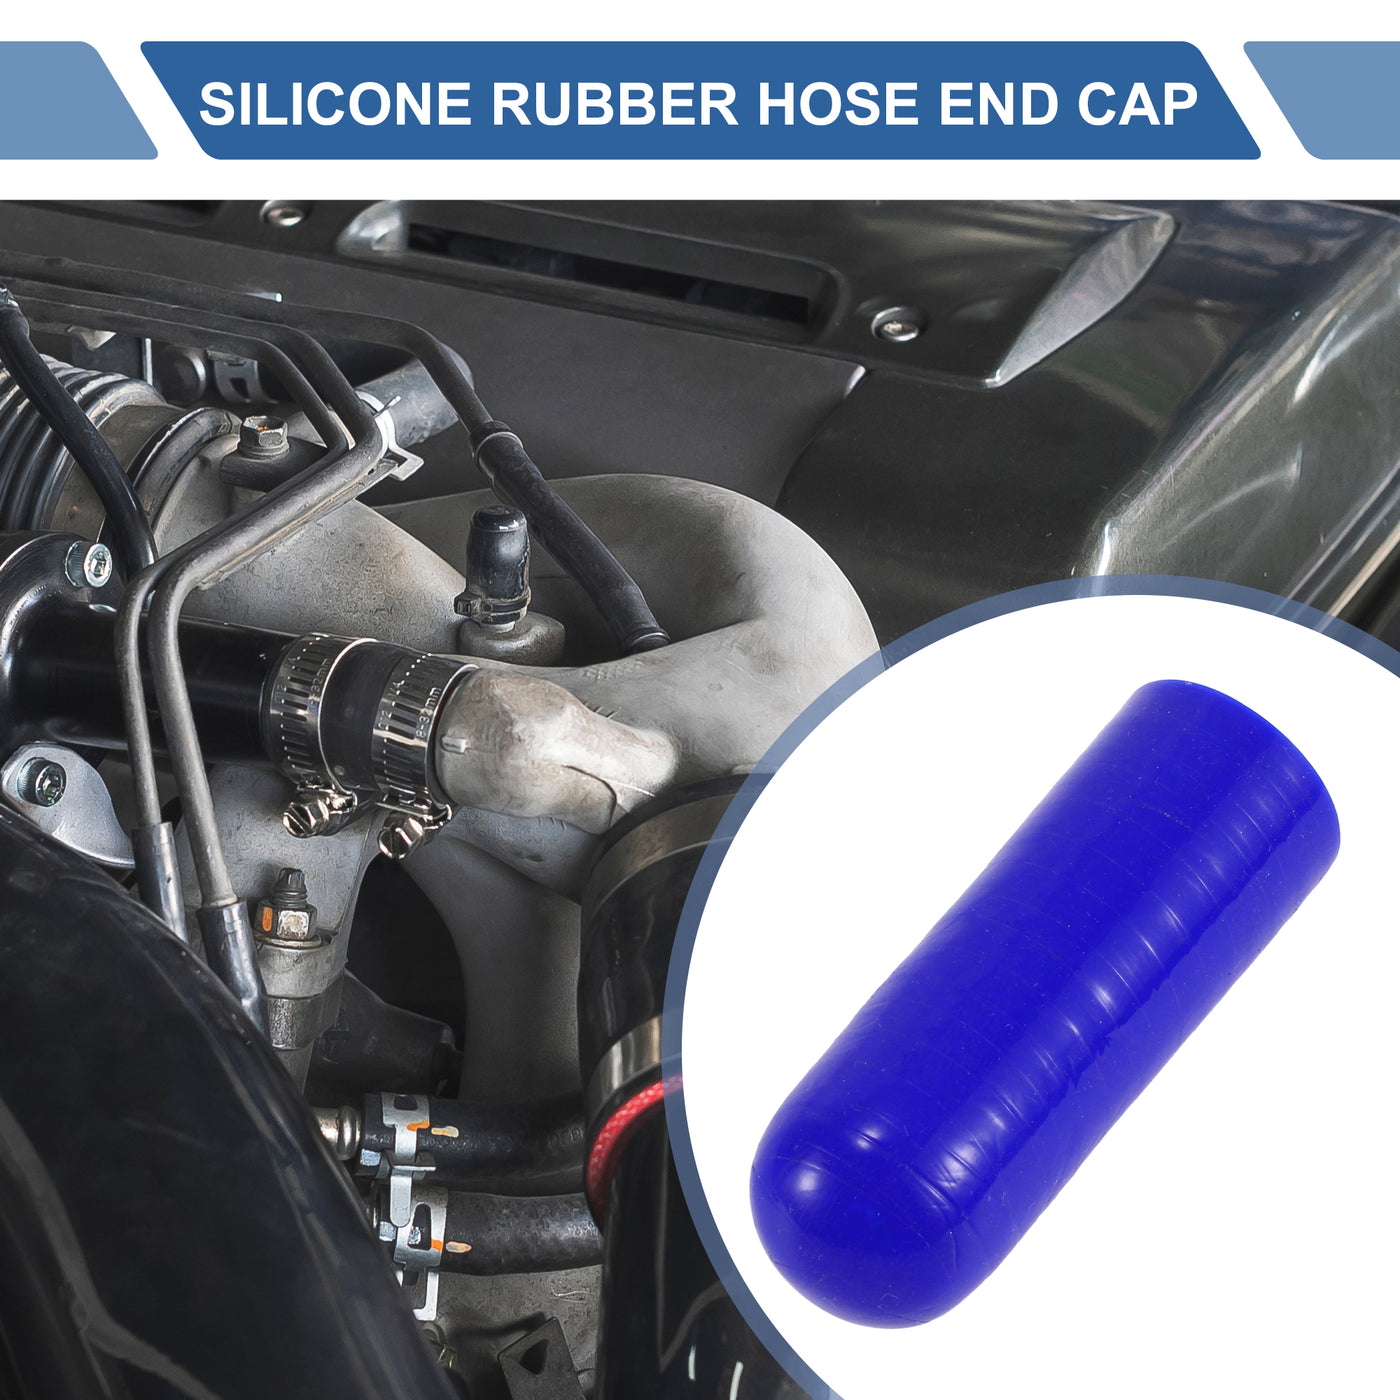 X AUTOHAUX 1 Pcs 60mm Length 18mm/0.71" ID Blue Car Silicone Rubber Hose End Cap with Clamp Silicone Reinforced Blanking Cap for Bypass Tube Universal